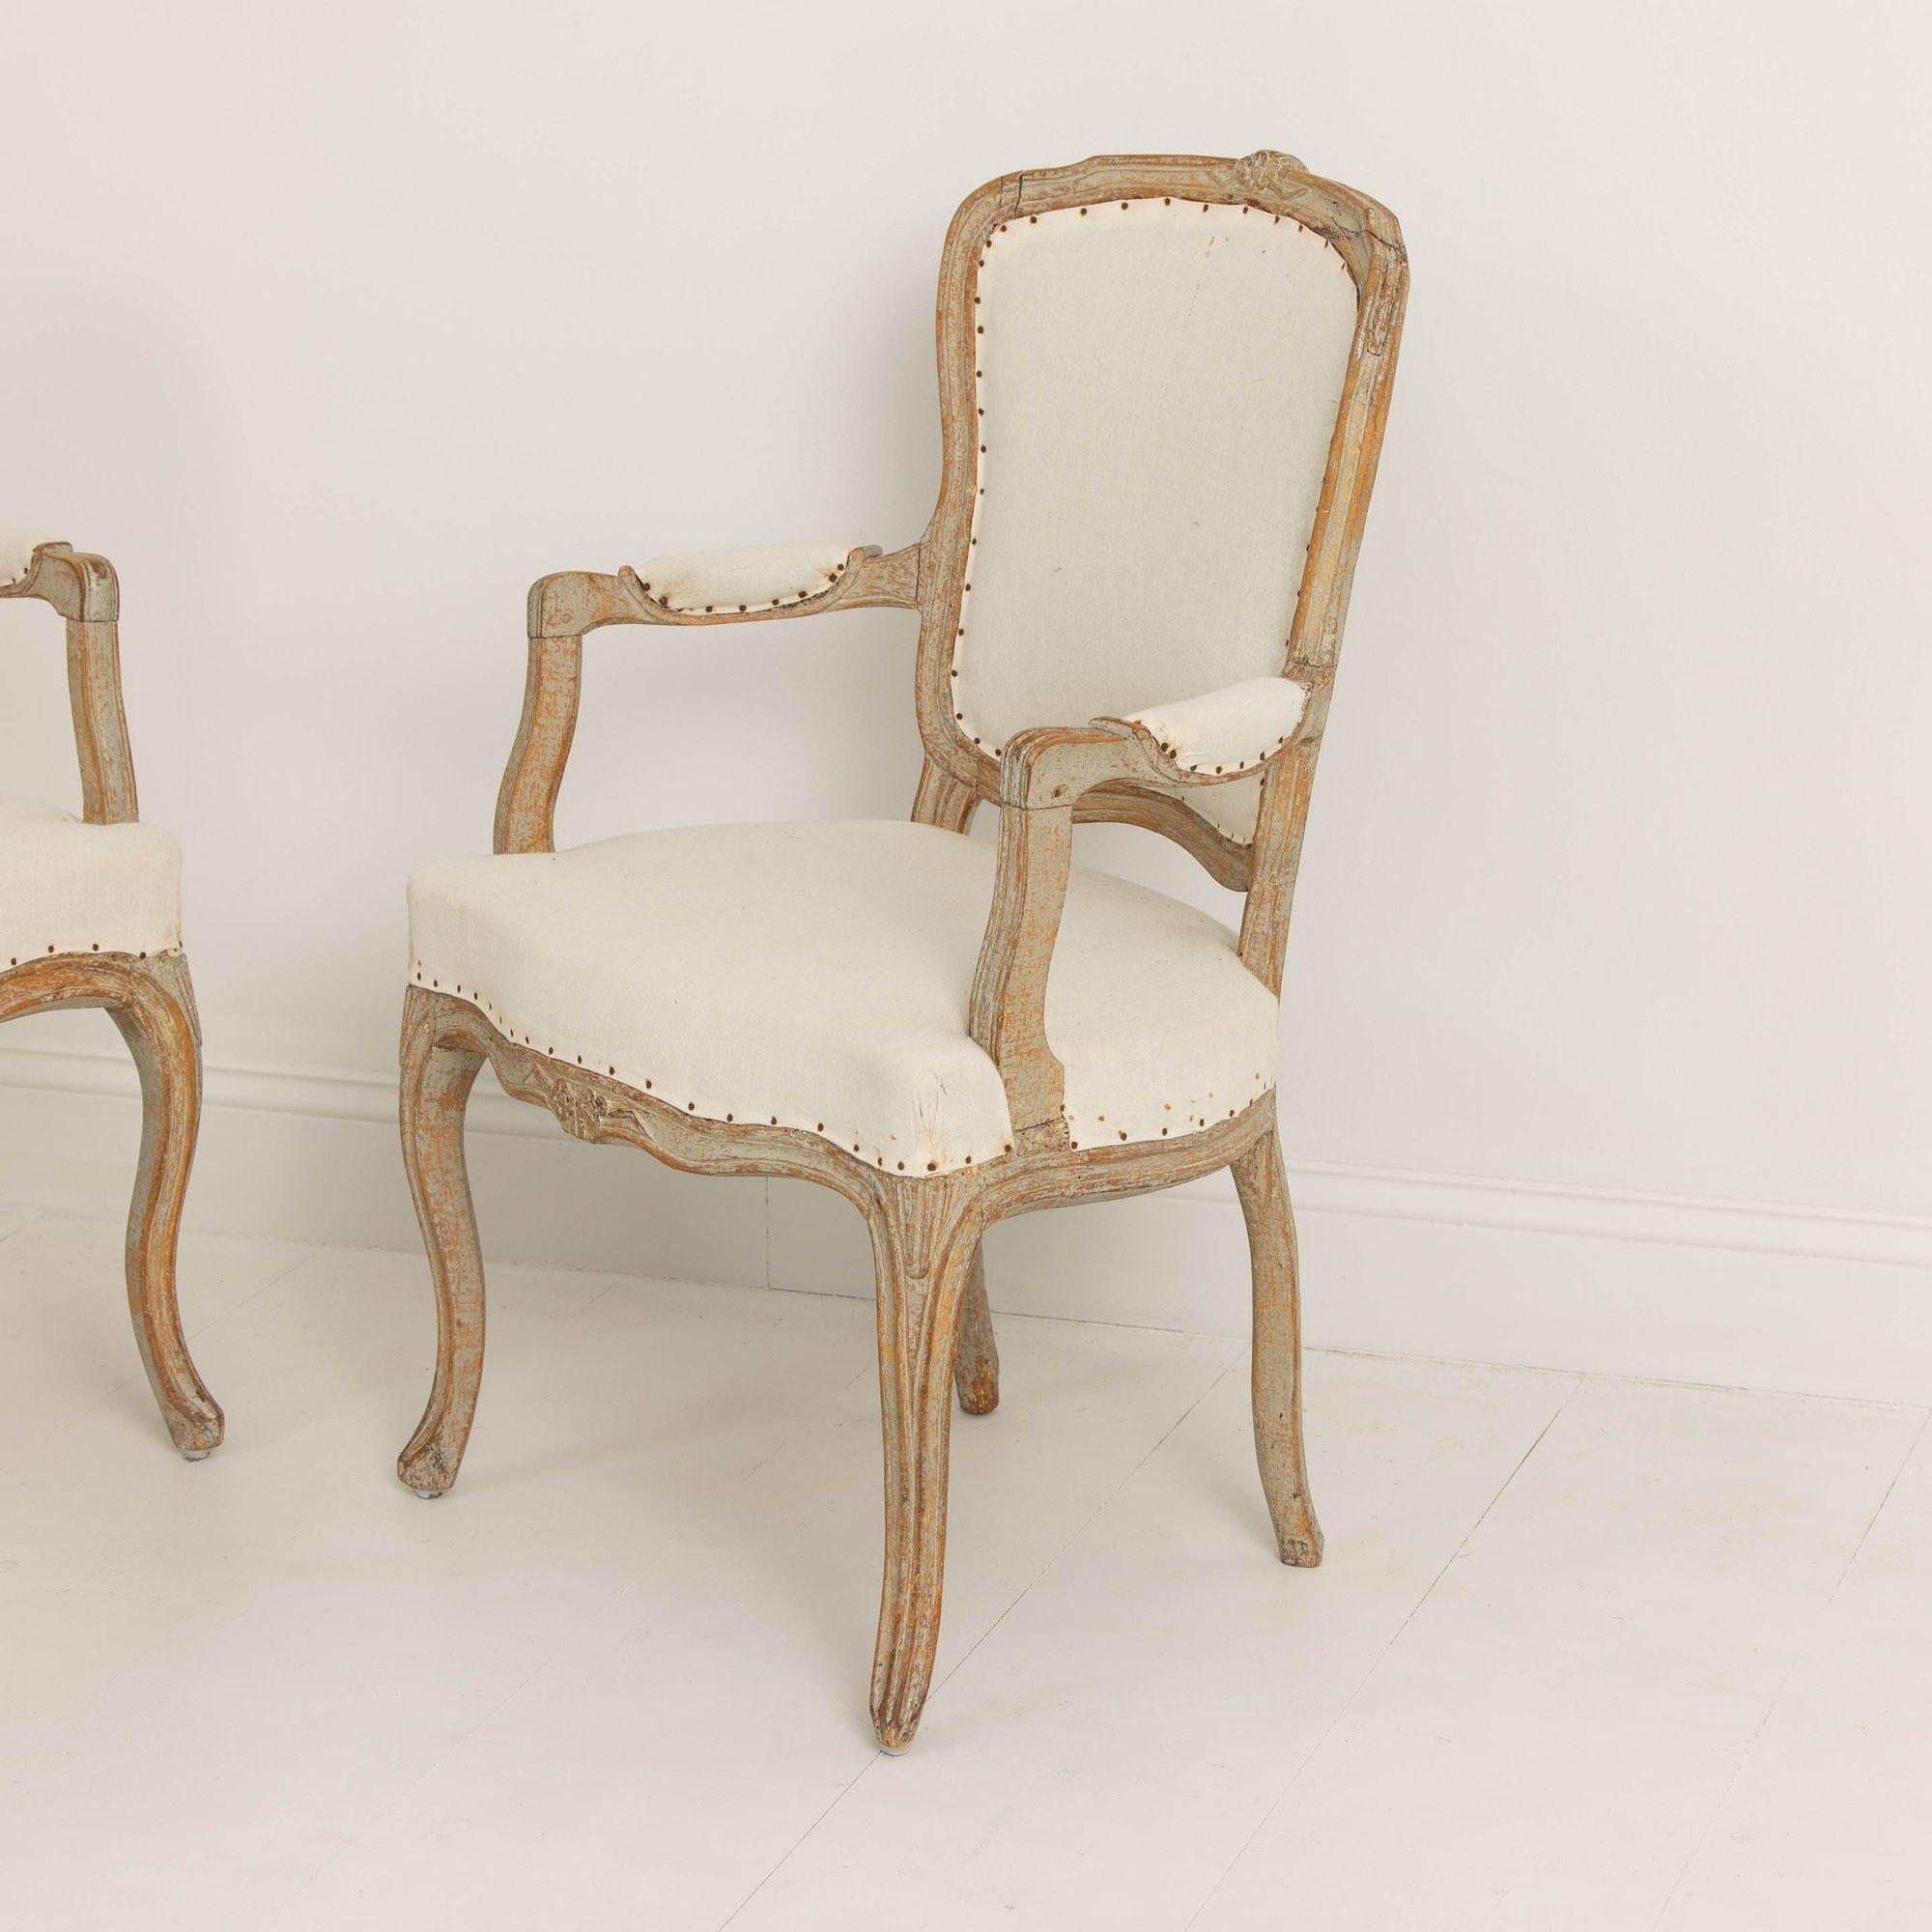 Hand-Carved Pair of 18th c. Swedish Rococo Period Armchairs in Original Paint  For Sale